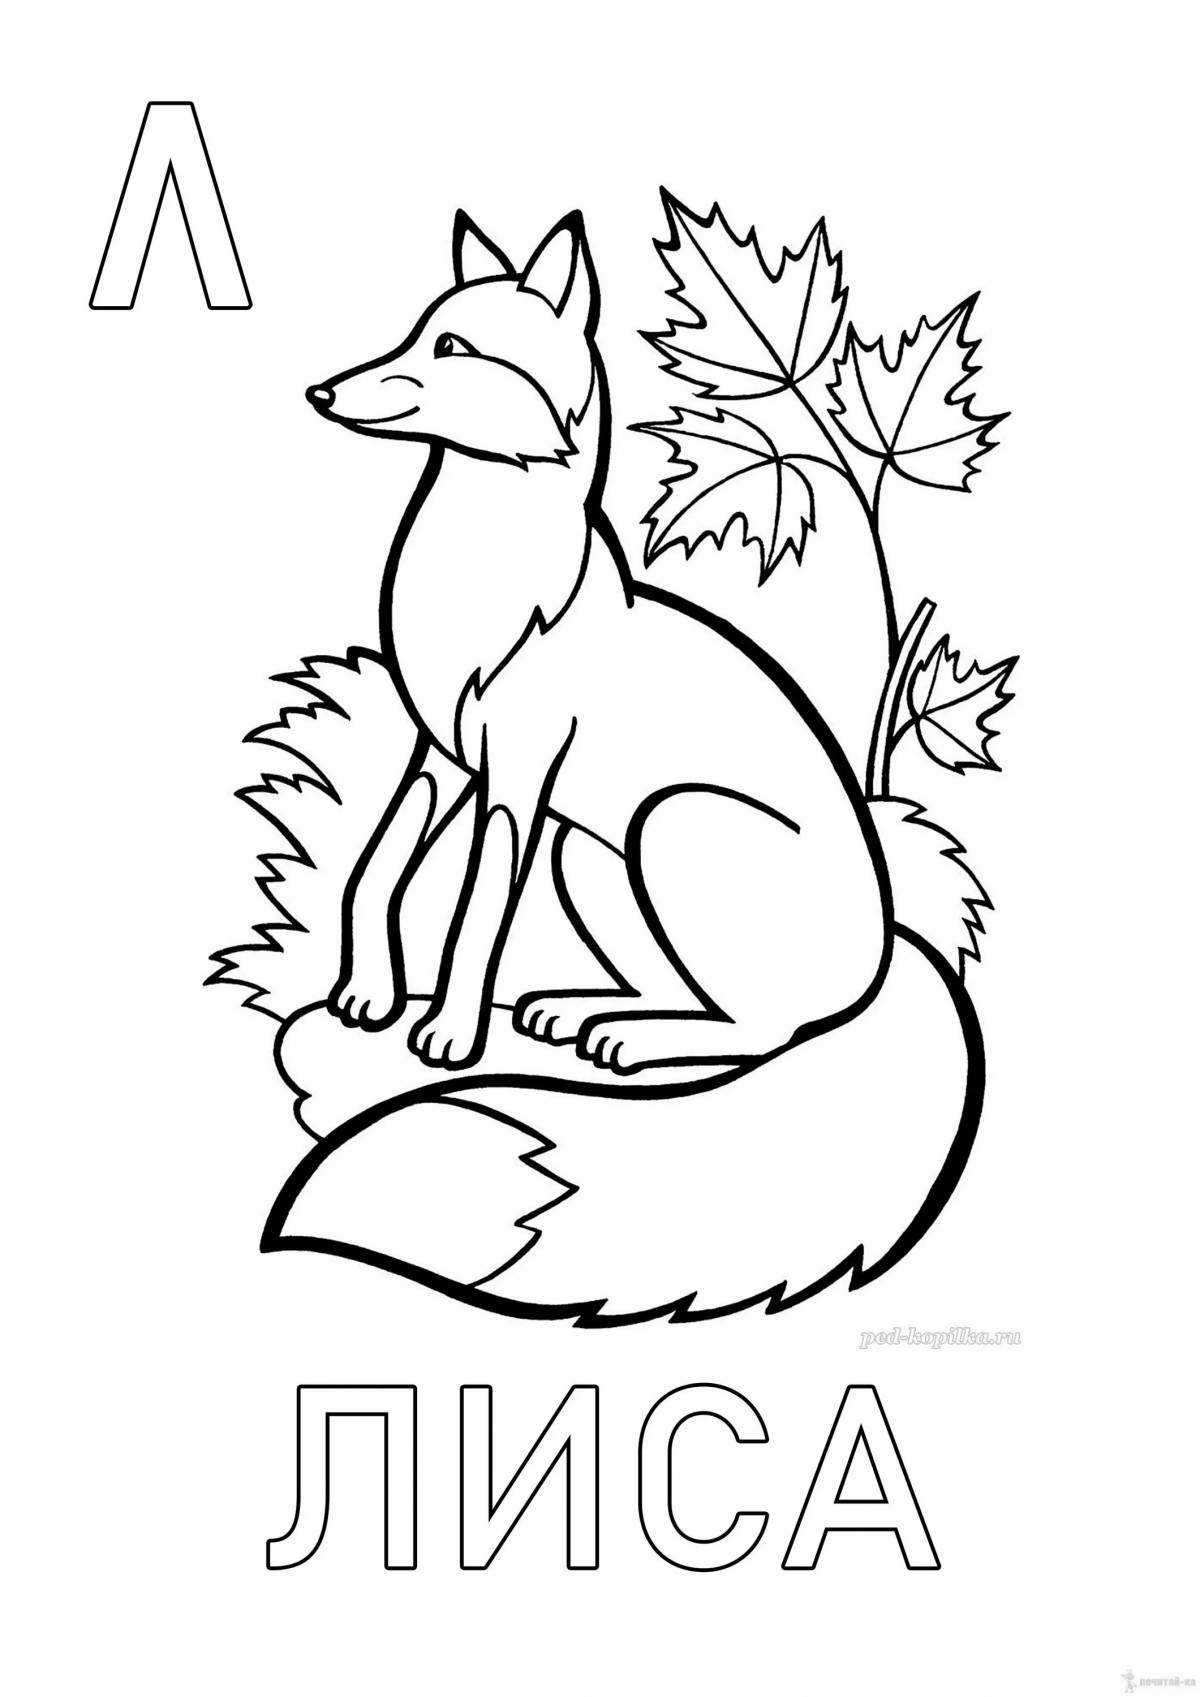 Coloring fox for kids